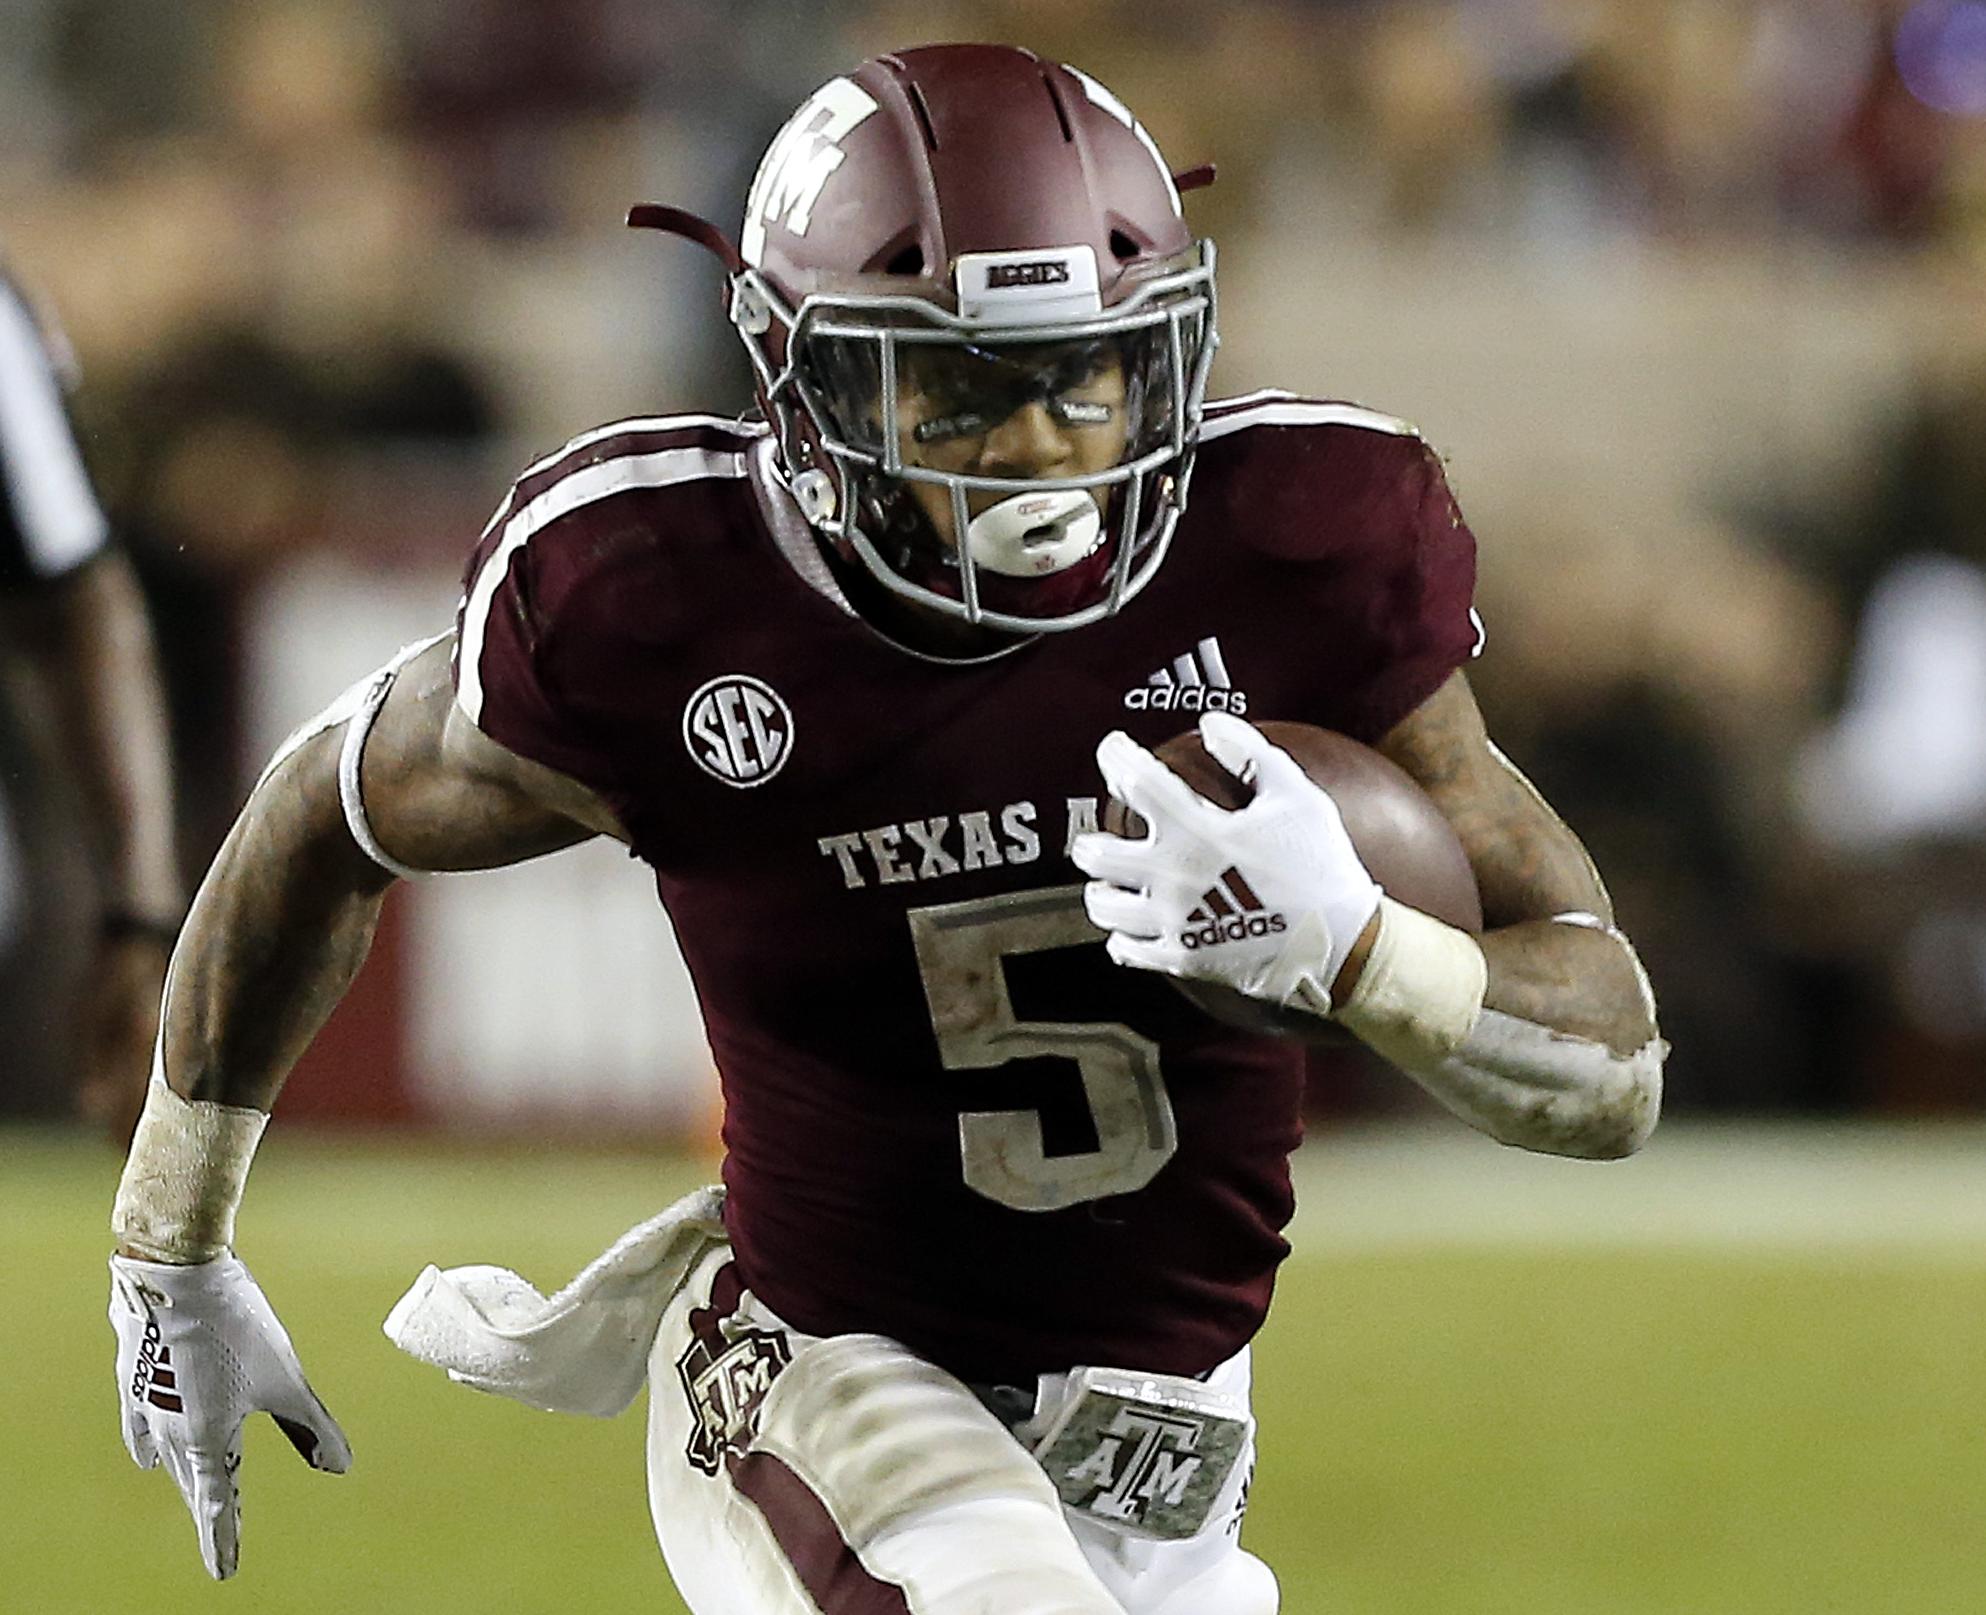 SEC rushing leader Trayveon Williams a relentless presence for A&M